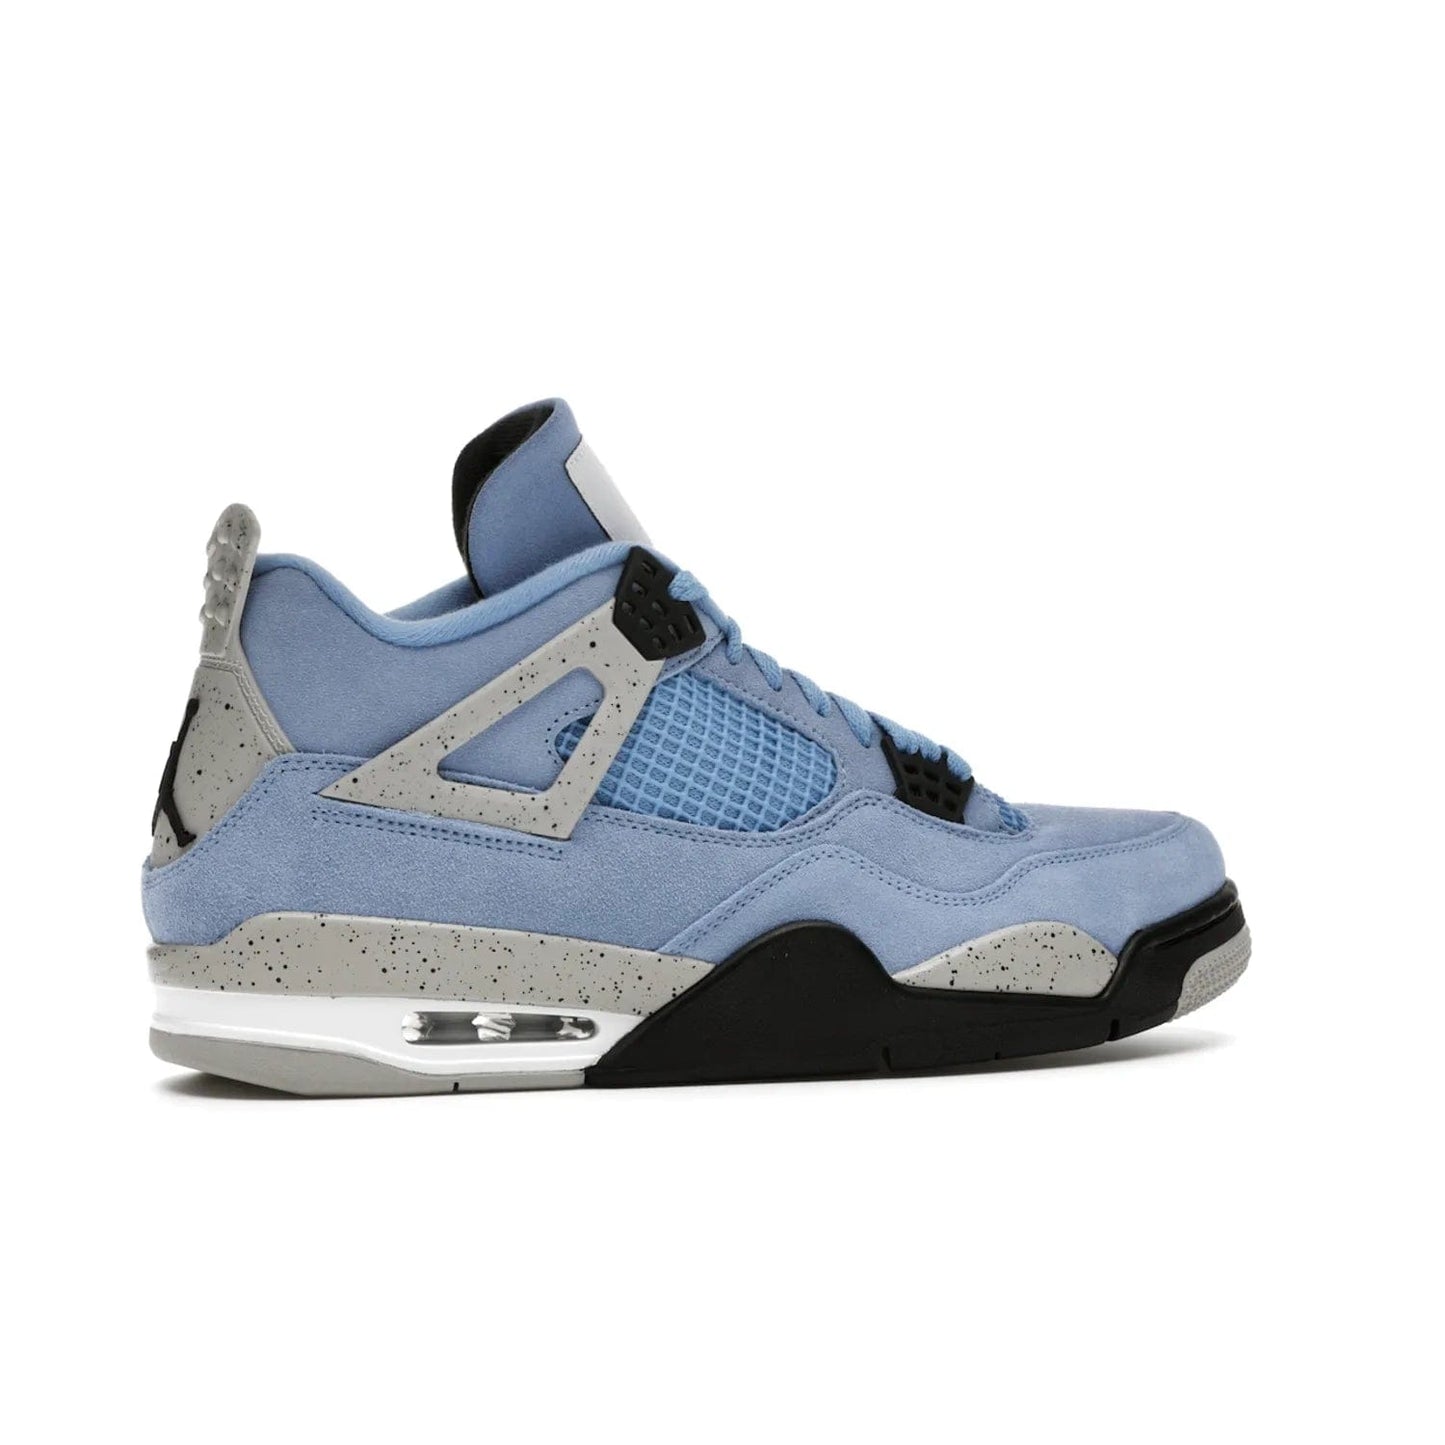 Jordan 4 Retro University Blue - Image 35 - Only at www.BallersClubKickz.com - The Air Jordan 4 University Blue honors MJ's alma mater. Rich University Blue suede, panels of netting, and Cement Grey speckled eyelets give this design an edgy look. Features a black, white and Tech Grey sole with a clear Air unit and two woven labels on the tongue. Jumpman logo & Team Jordan jock tag included. Released April 2021.